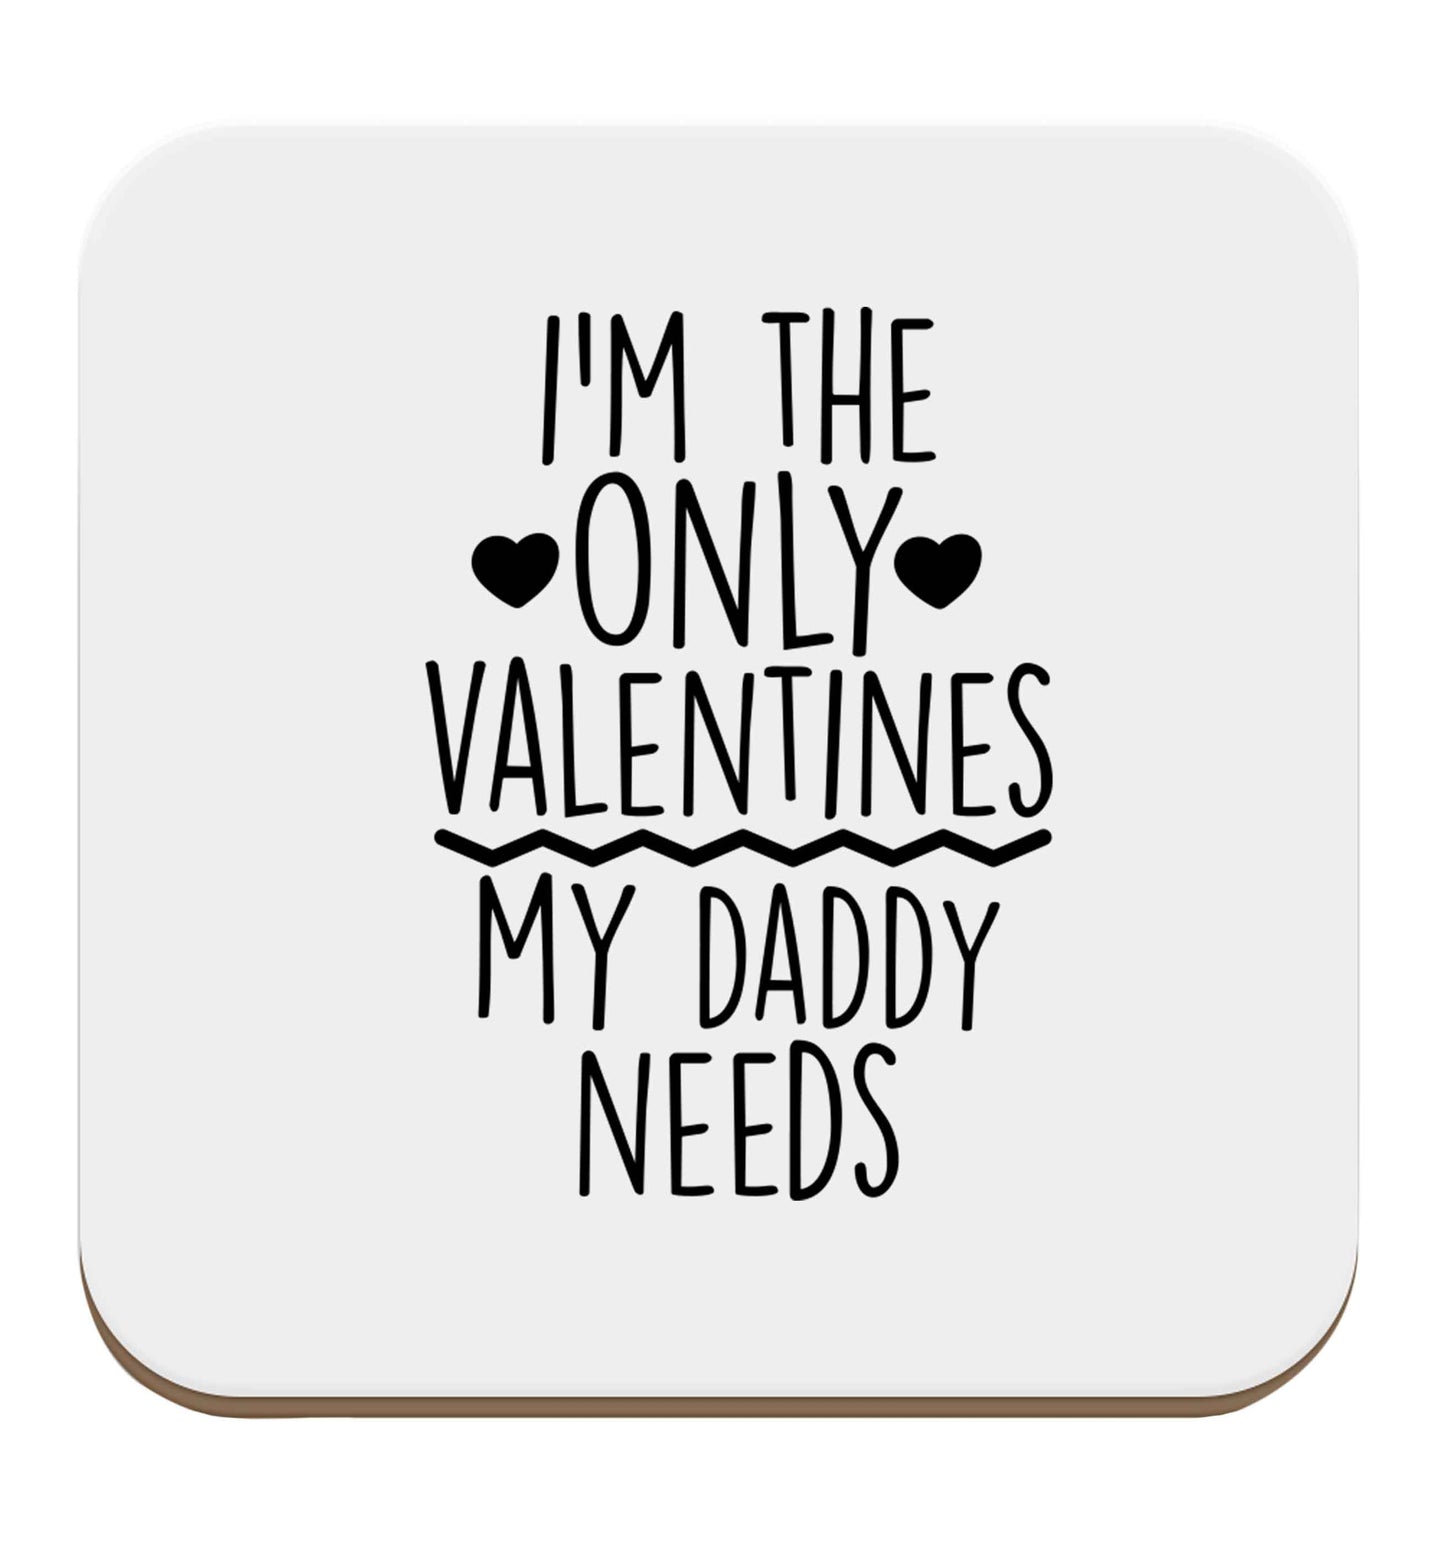 I'm the only valentines my daddy needs set of four coasters